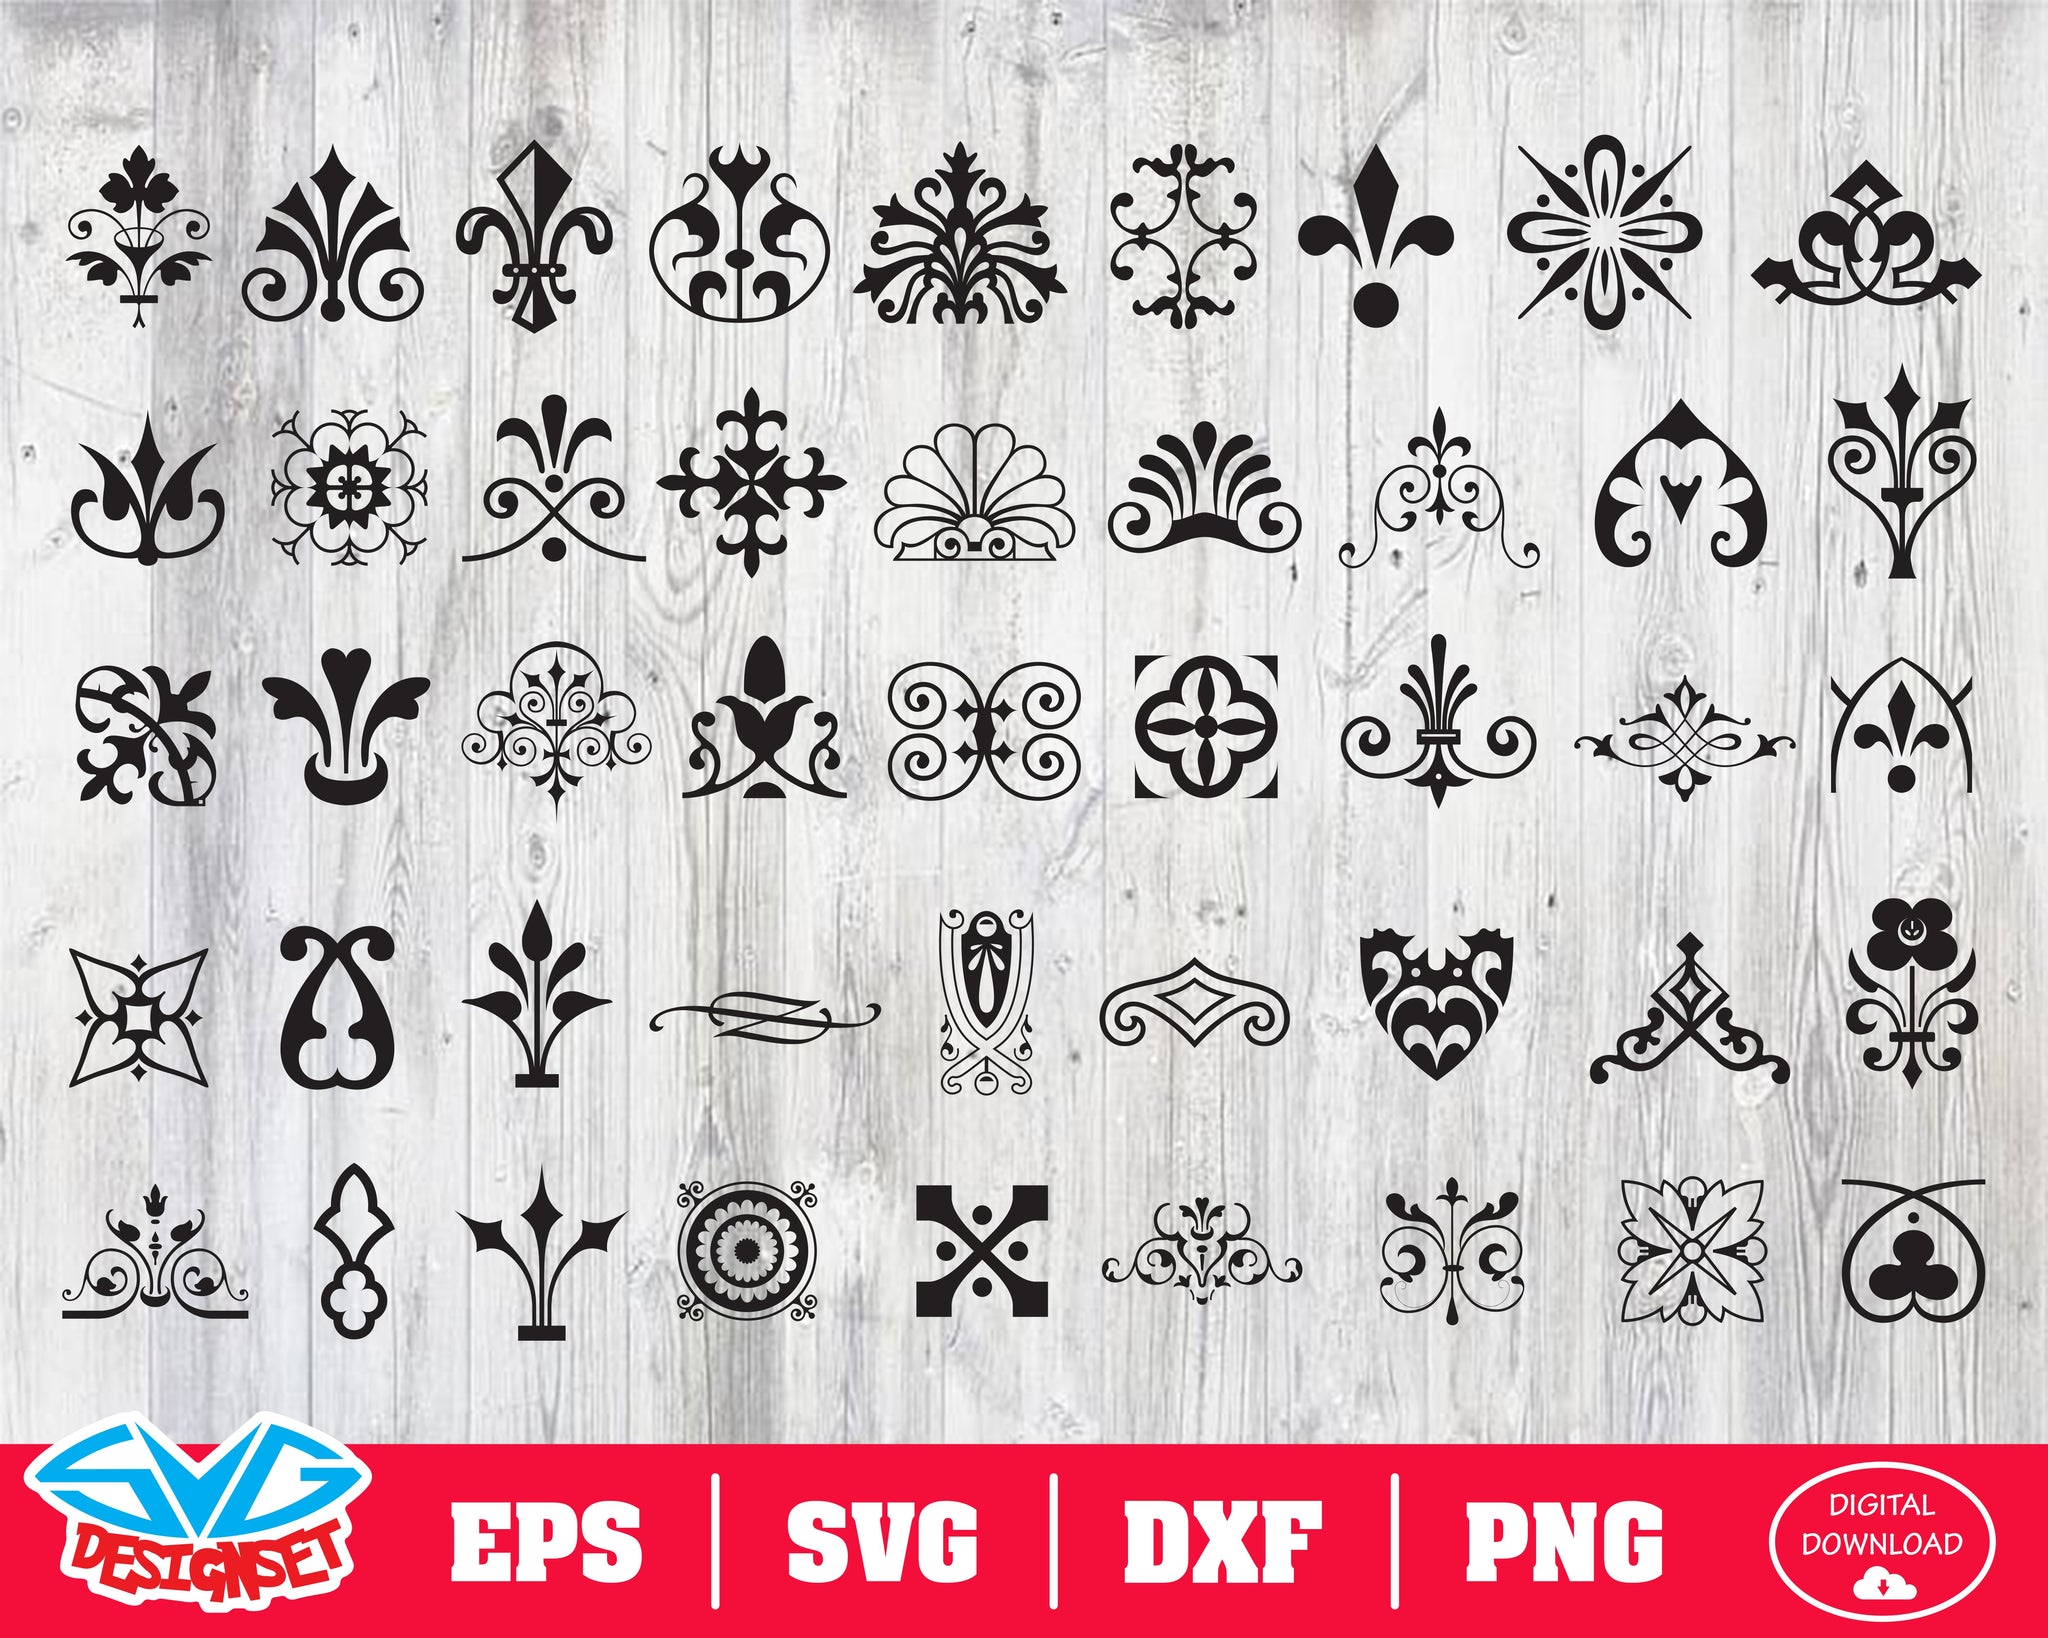 Ornamental elements Svg, Dxf, Eps, Png, Clipart, Silhouette and Cutfiles #2 - SVGDesignSets